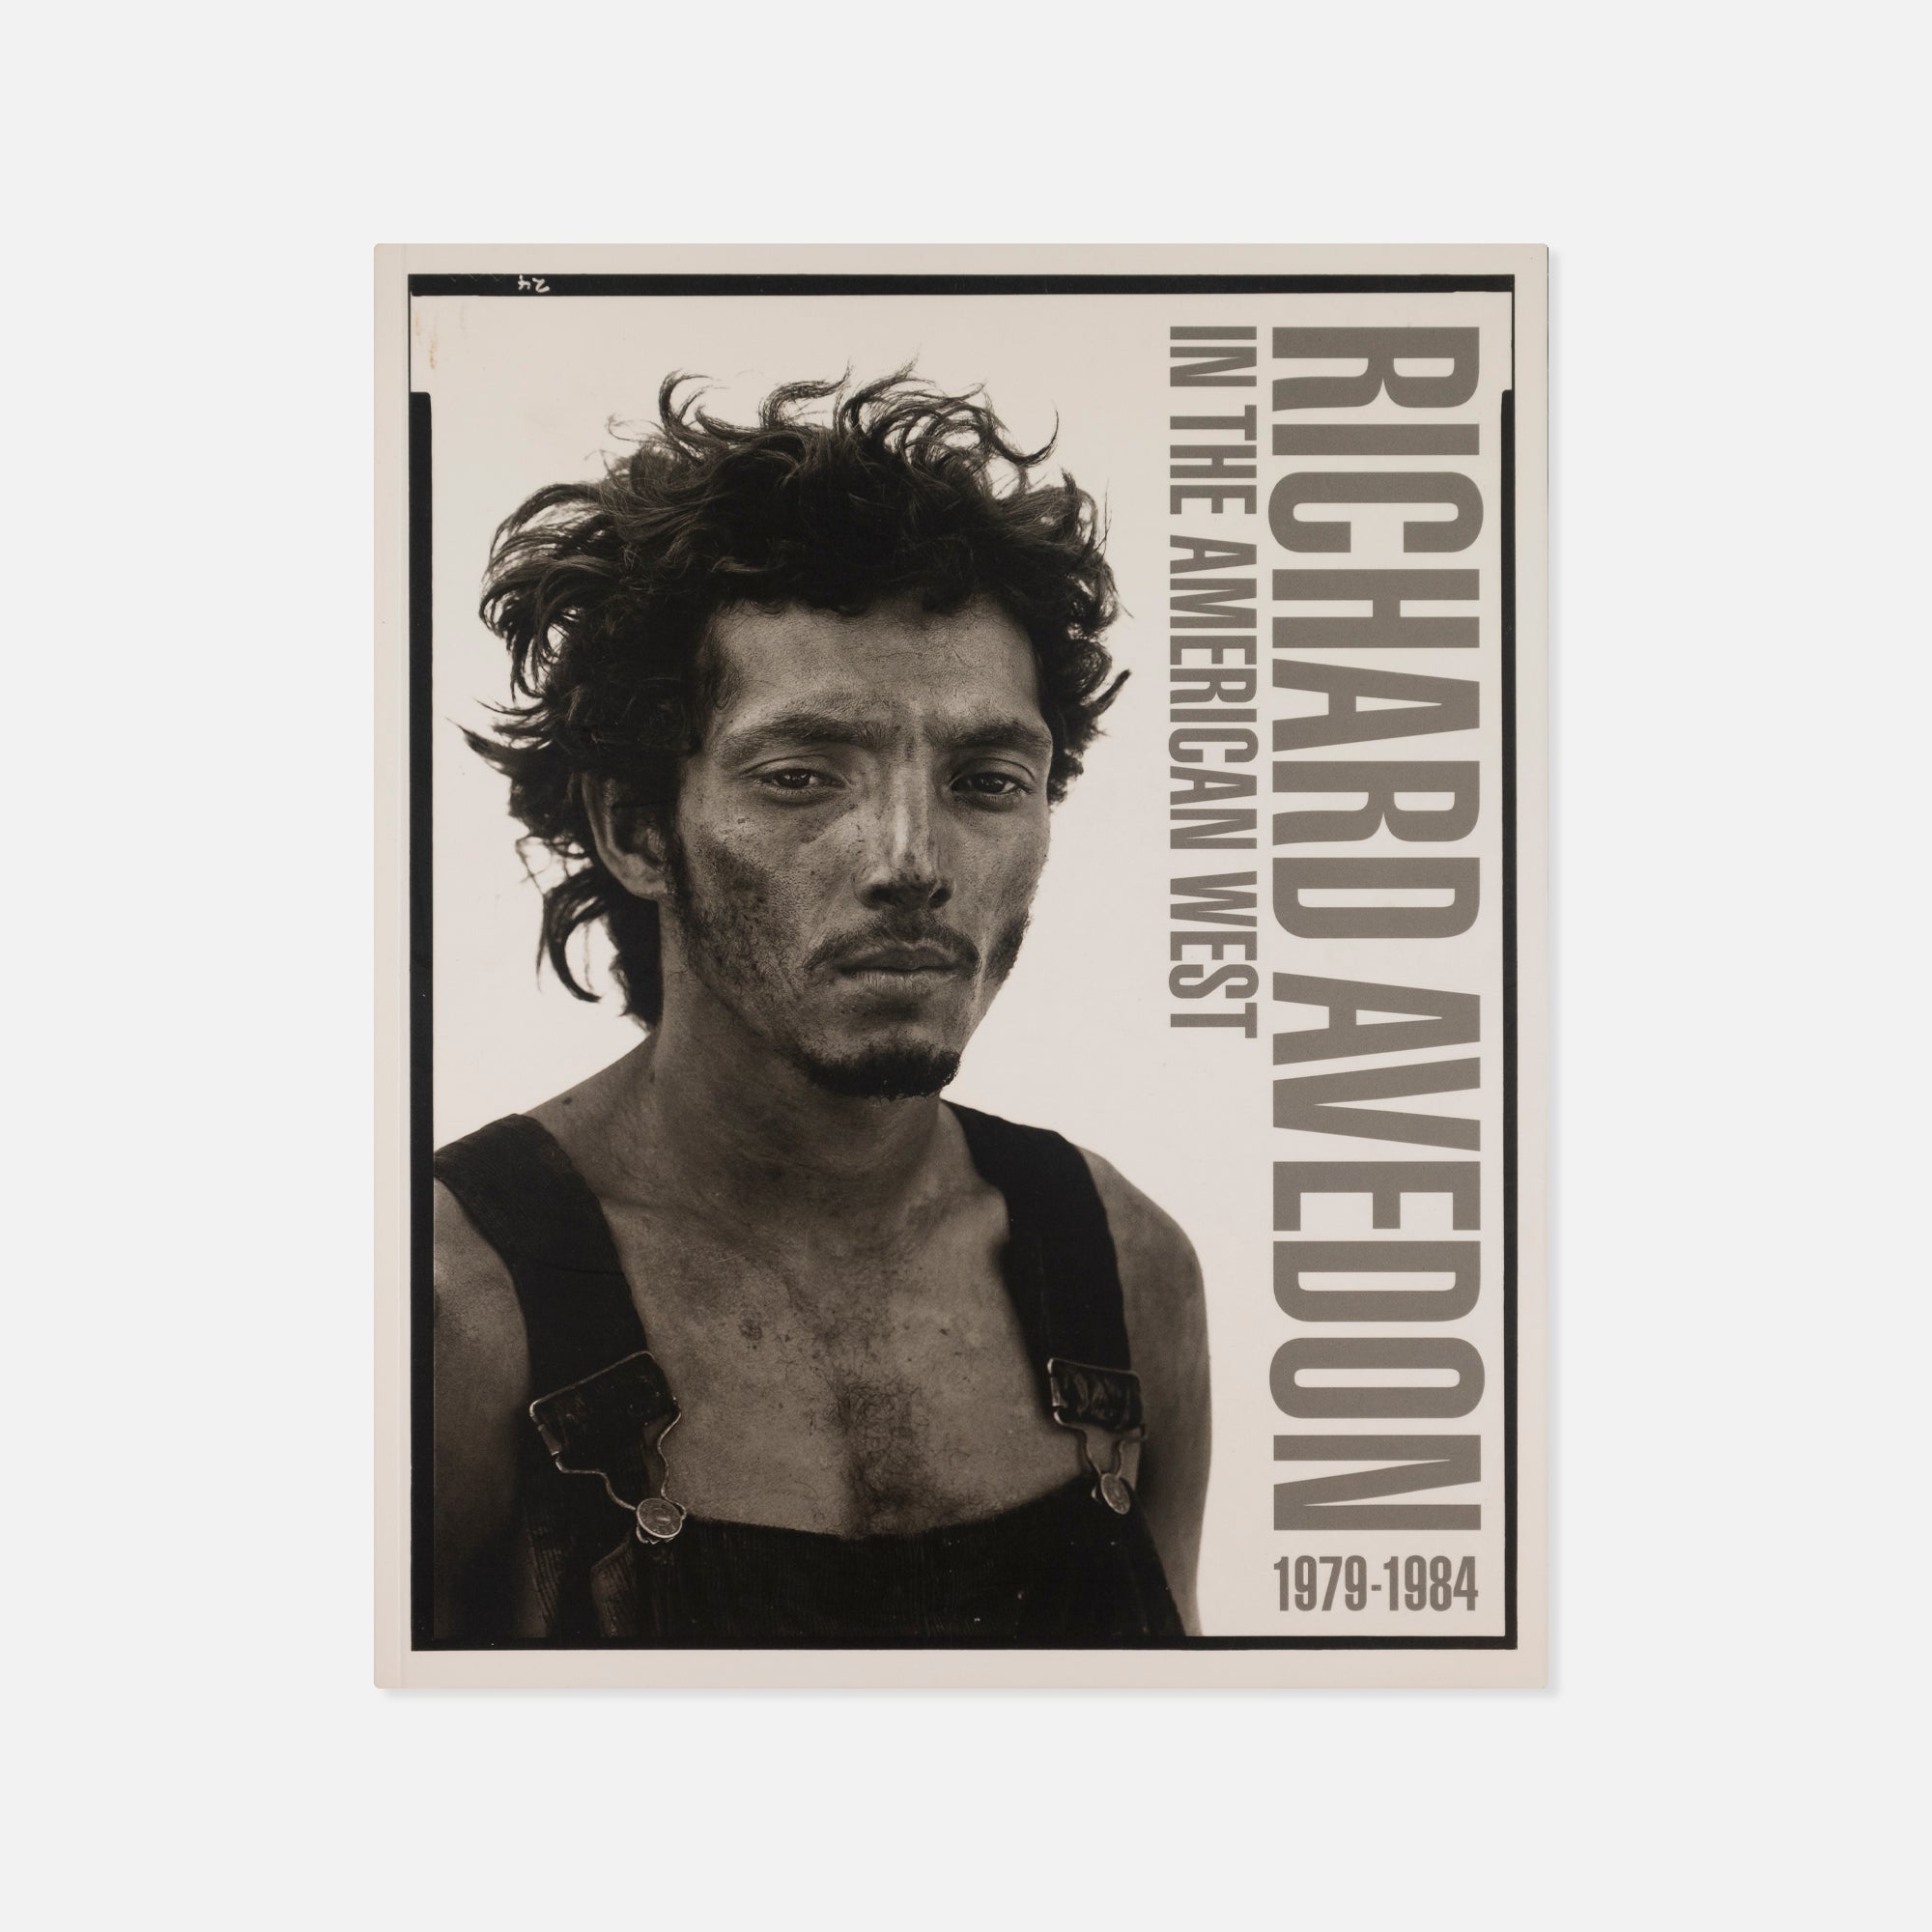 Richard Avedon — In The American West 1979-1984